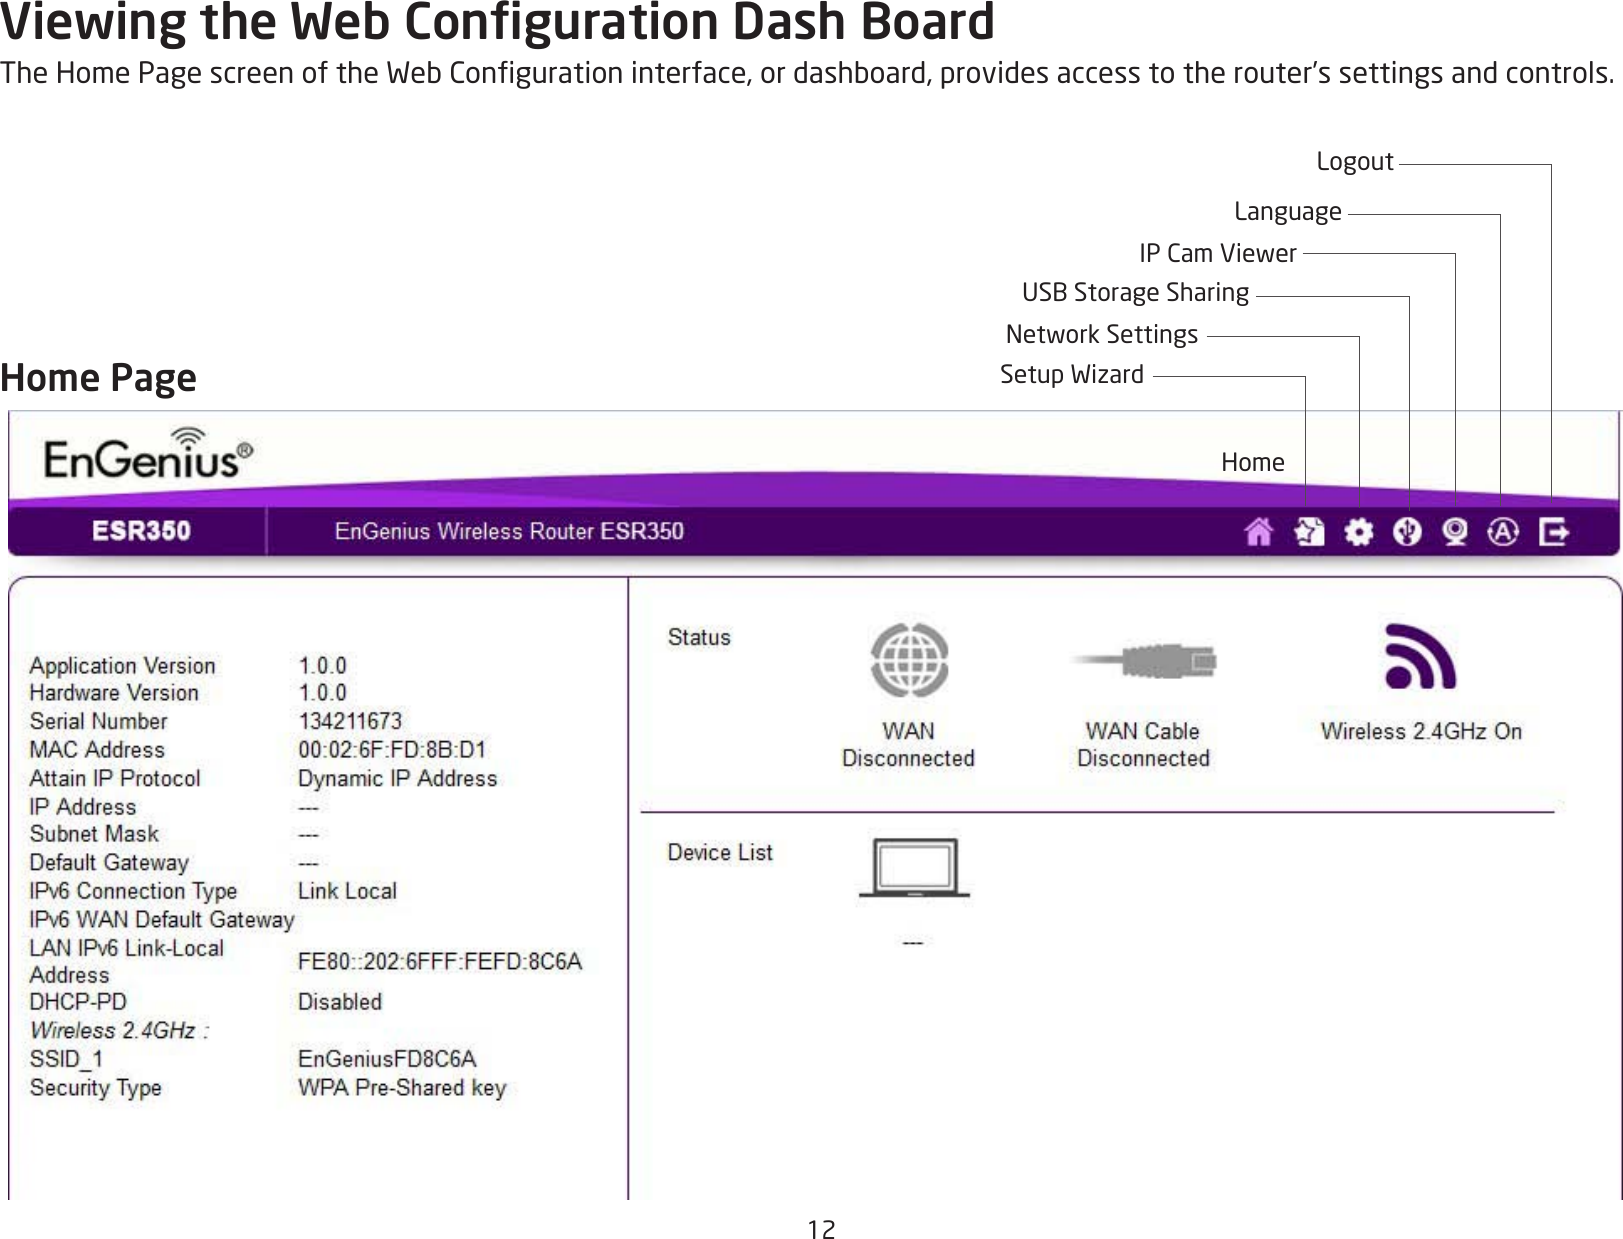 12Viewing the Web Conguration Dash BoardTheHomePagescreenoftheWebCongurationinterface,ordashboard,providesaccesstotherouter’ssettingsandcontrols.Home PageHomeSetupWizardNetworkSettingsUSBStorageSharingIPCamViewerLanguageLogout